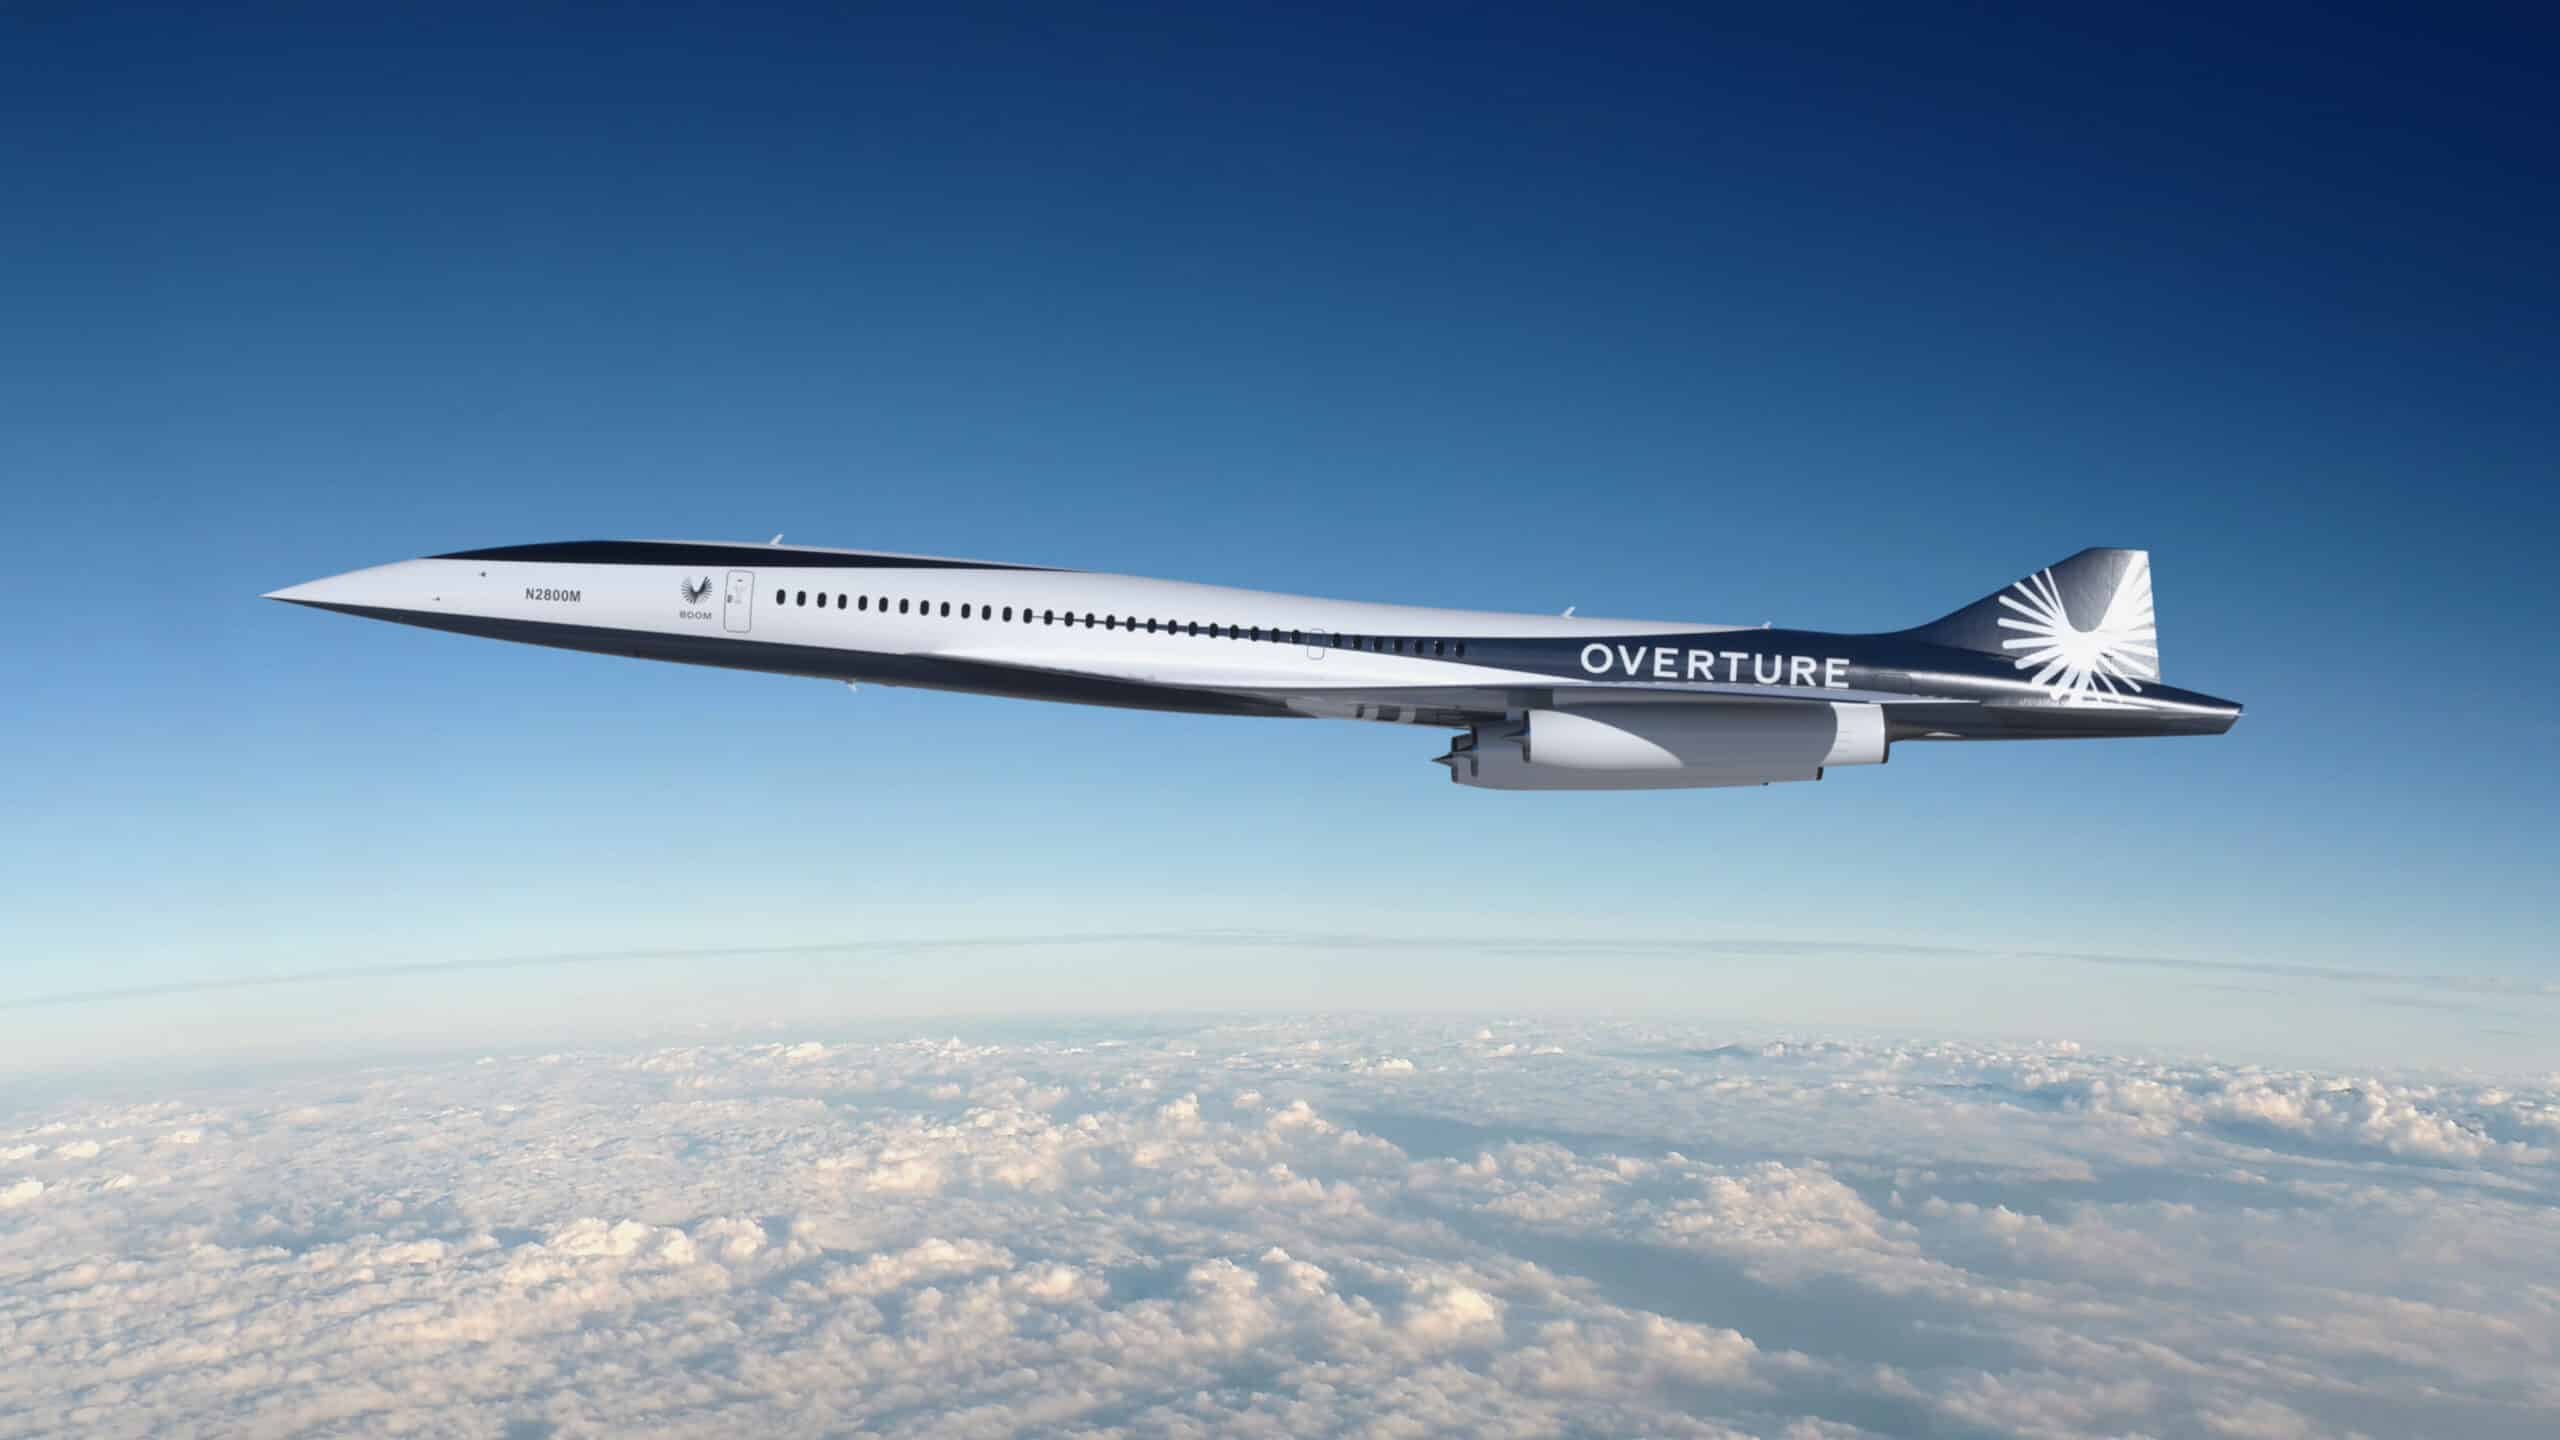 American Airlines Announces Agreement to Purchase Boom Supersonic Overture Aircraft, Places Deposit on 20 Overtures